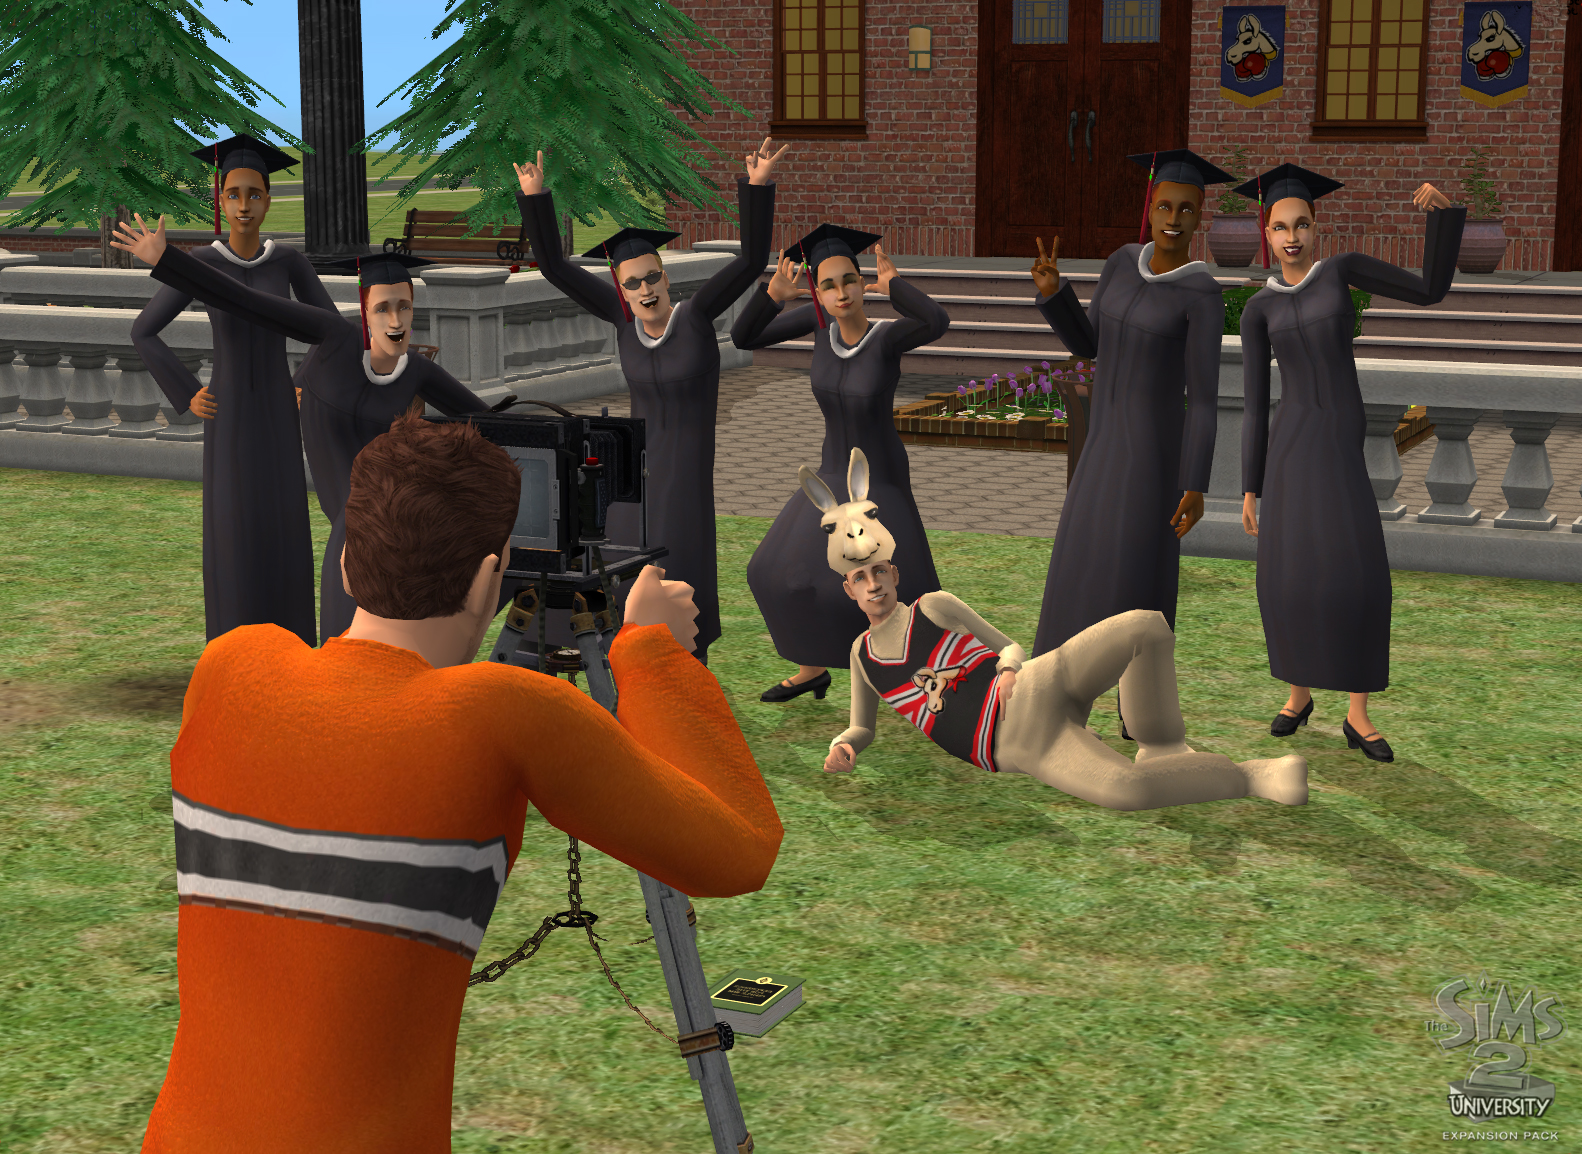 sims 2 university, sims 2 university life, best sims expansions